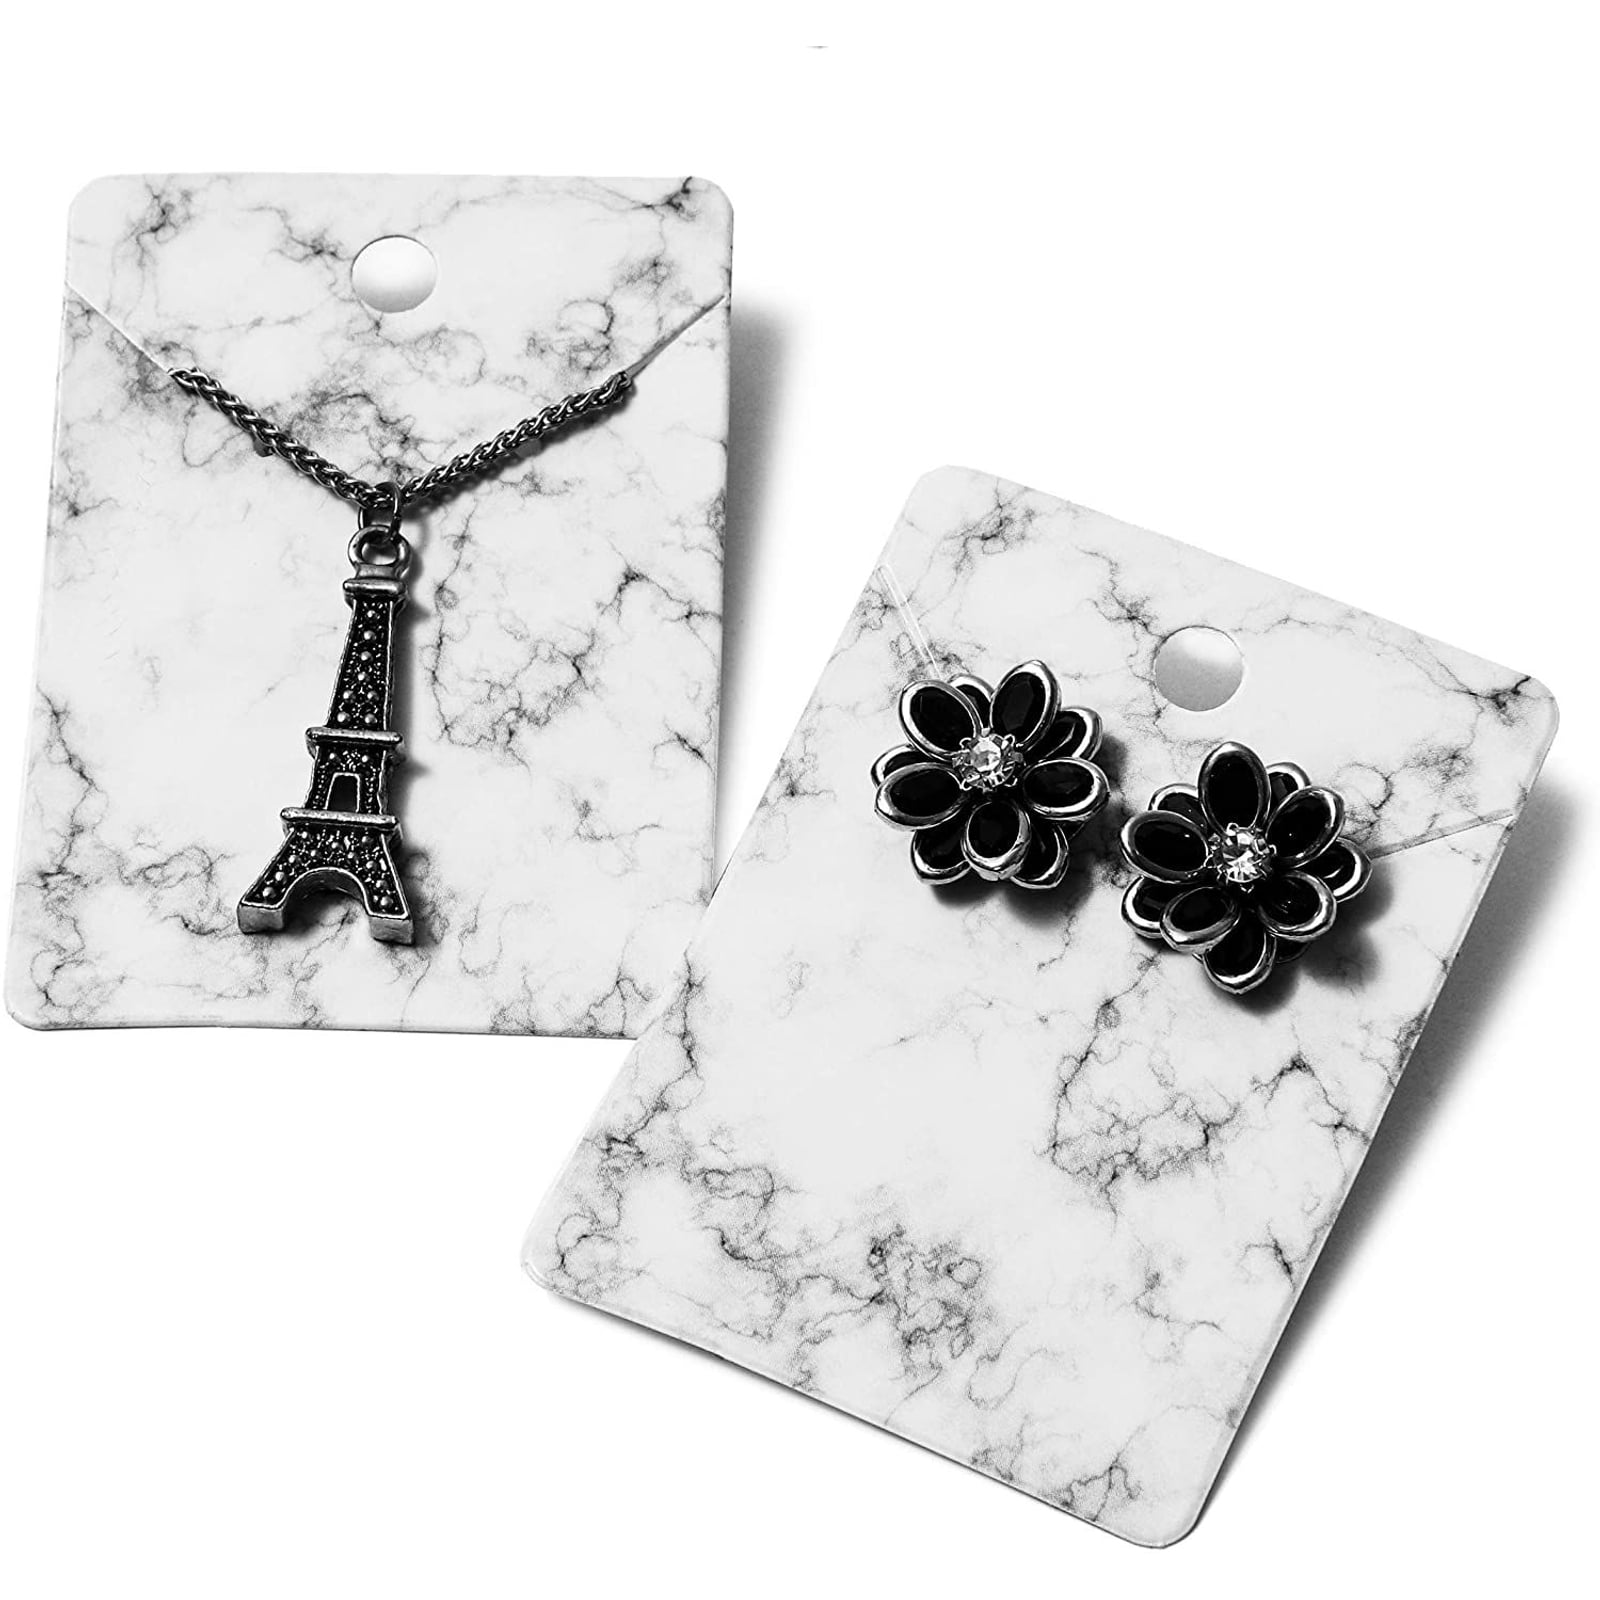 800 Pieces Marble Design Earring Card Display Holder Set Include 200 Marble Display Card in 4 Color 200 Self-Seal Bags 400 Earring Backs for Jewelry Display Packing 